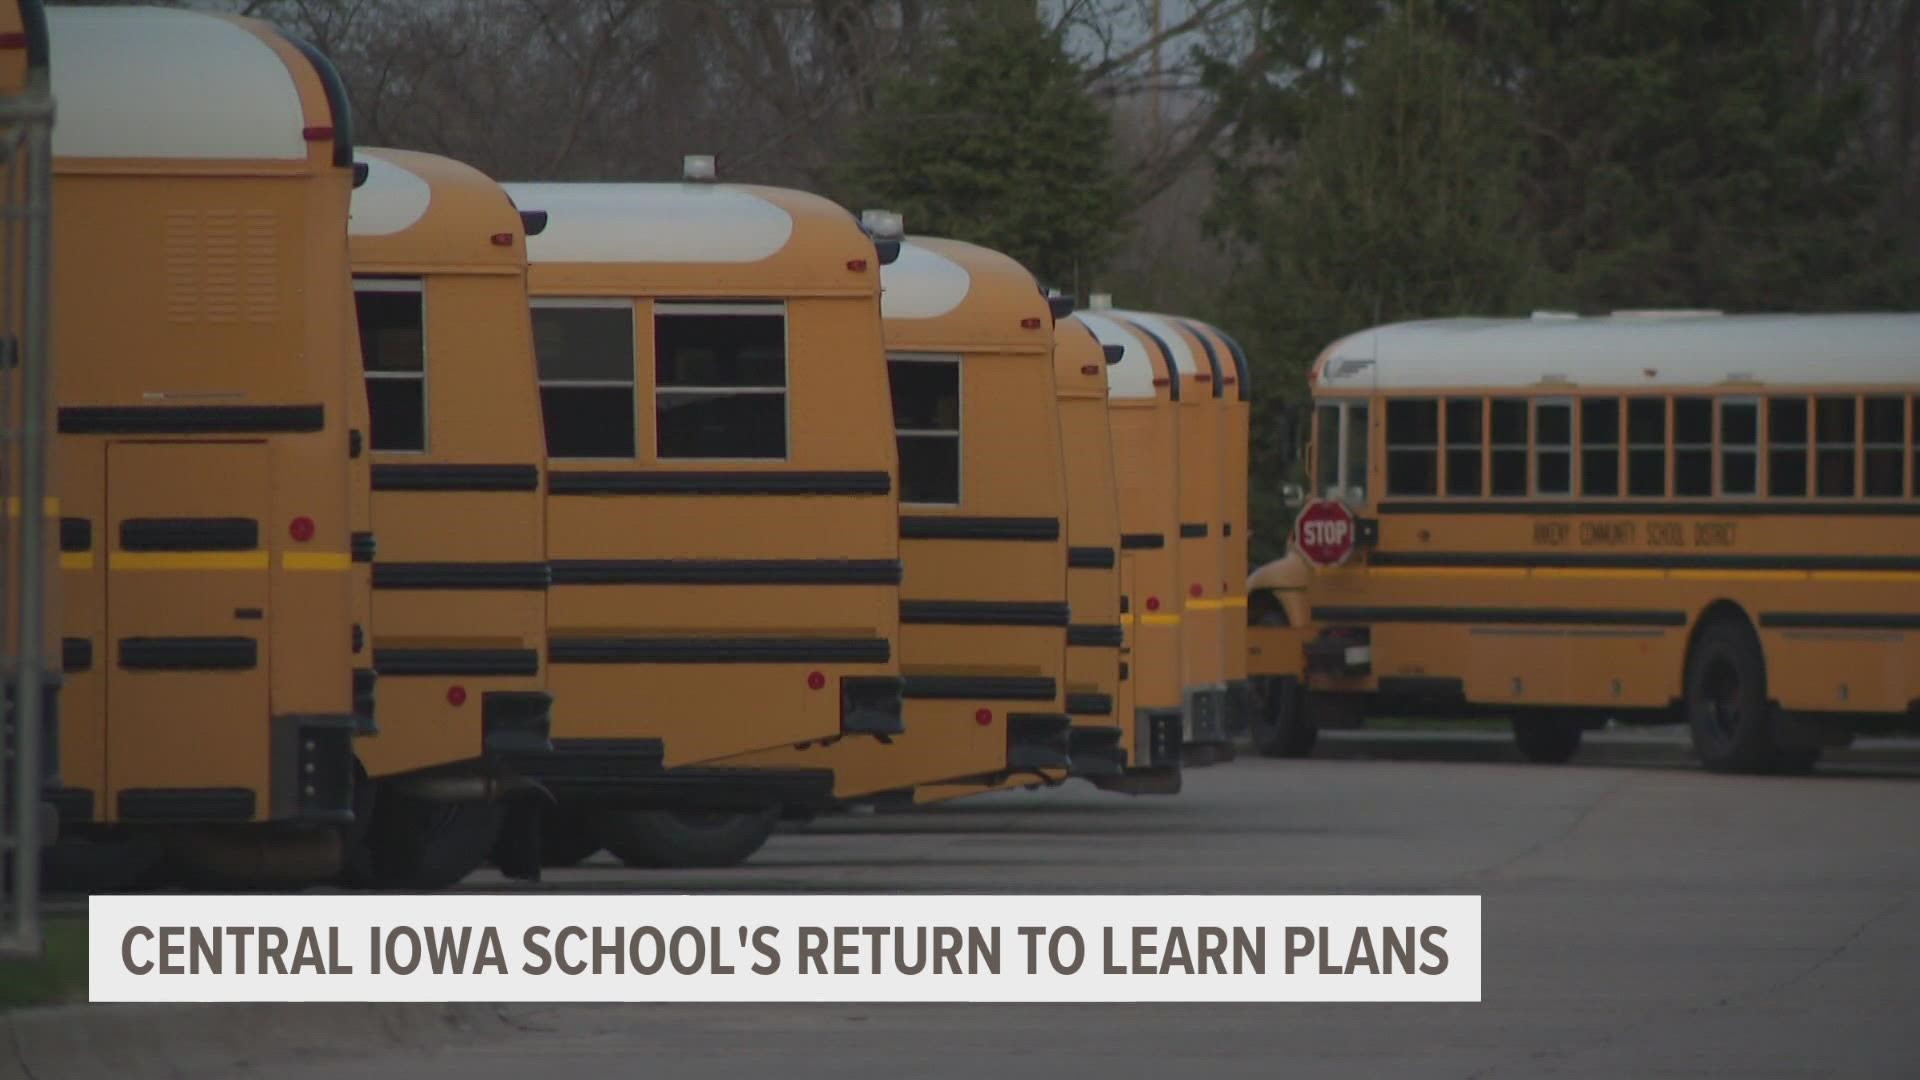 Local 5 reached out to school districts across the Des Moines metro to see how CDC changes will impact their Return to Learn plans.